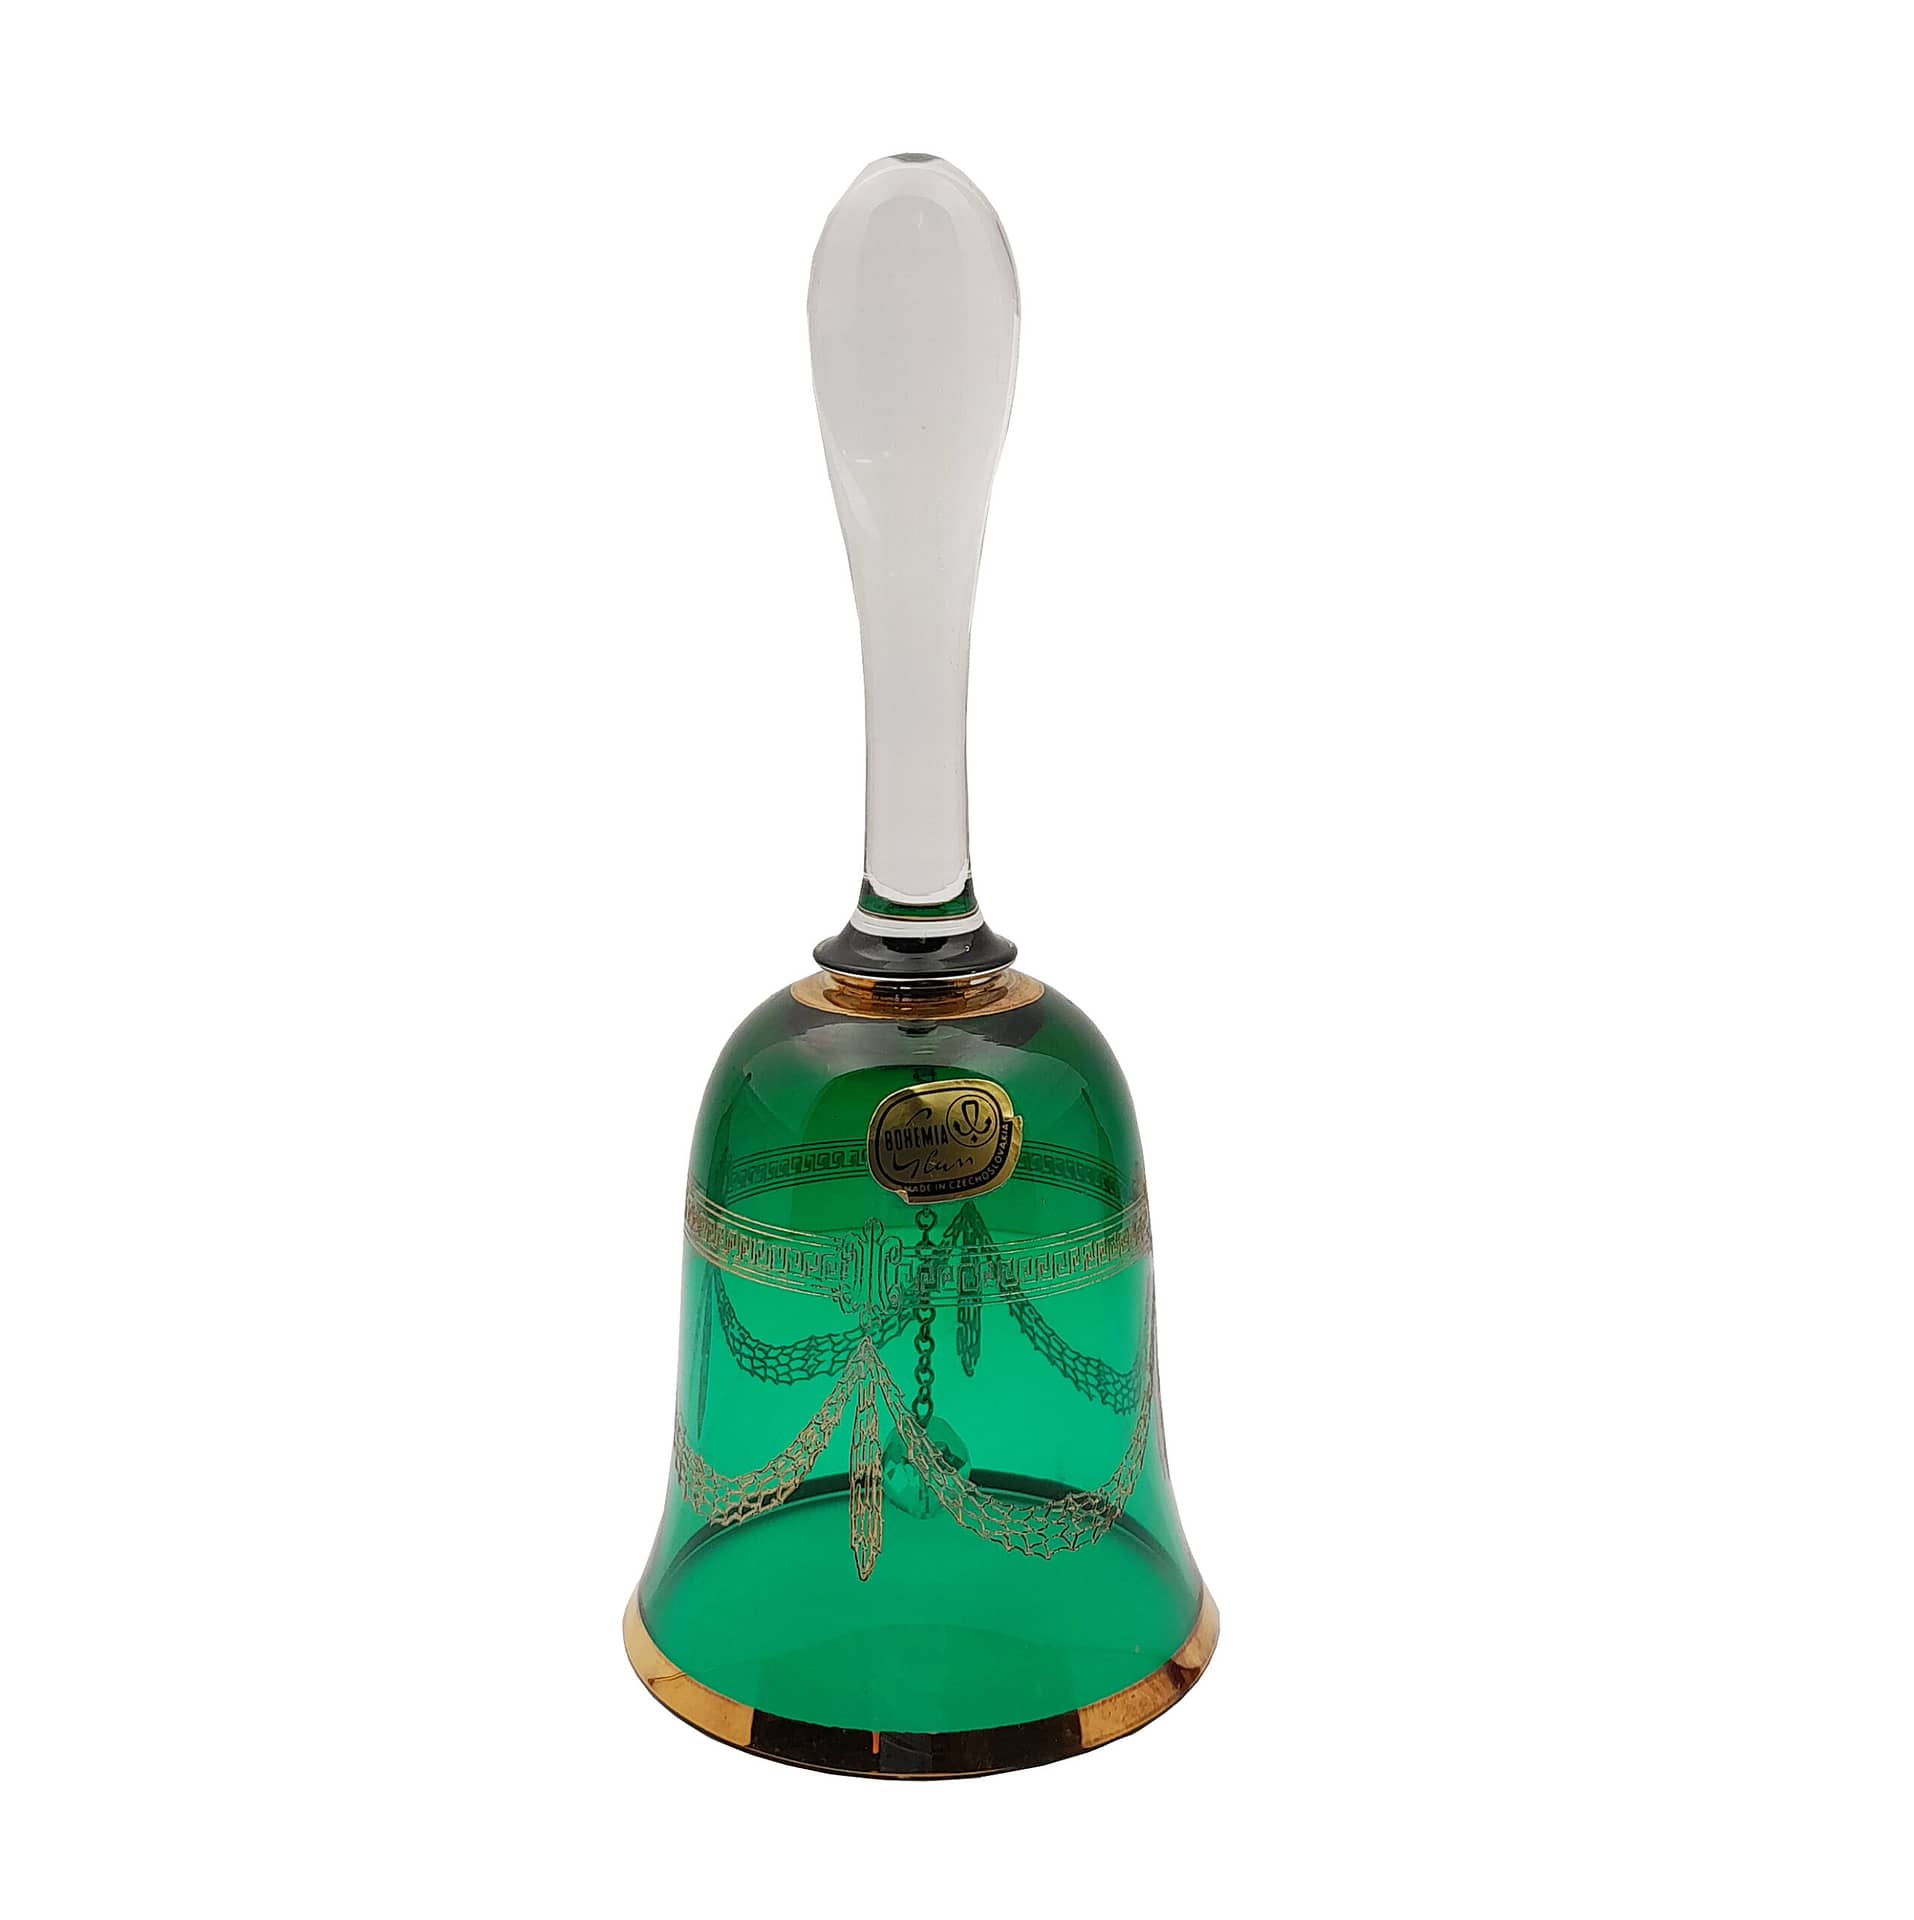 Vintage Bohemian Hand-blown Emerald Green Glass Table Bell 1950-1970